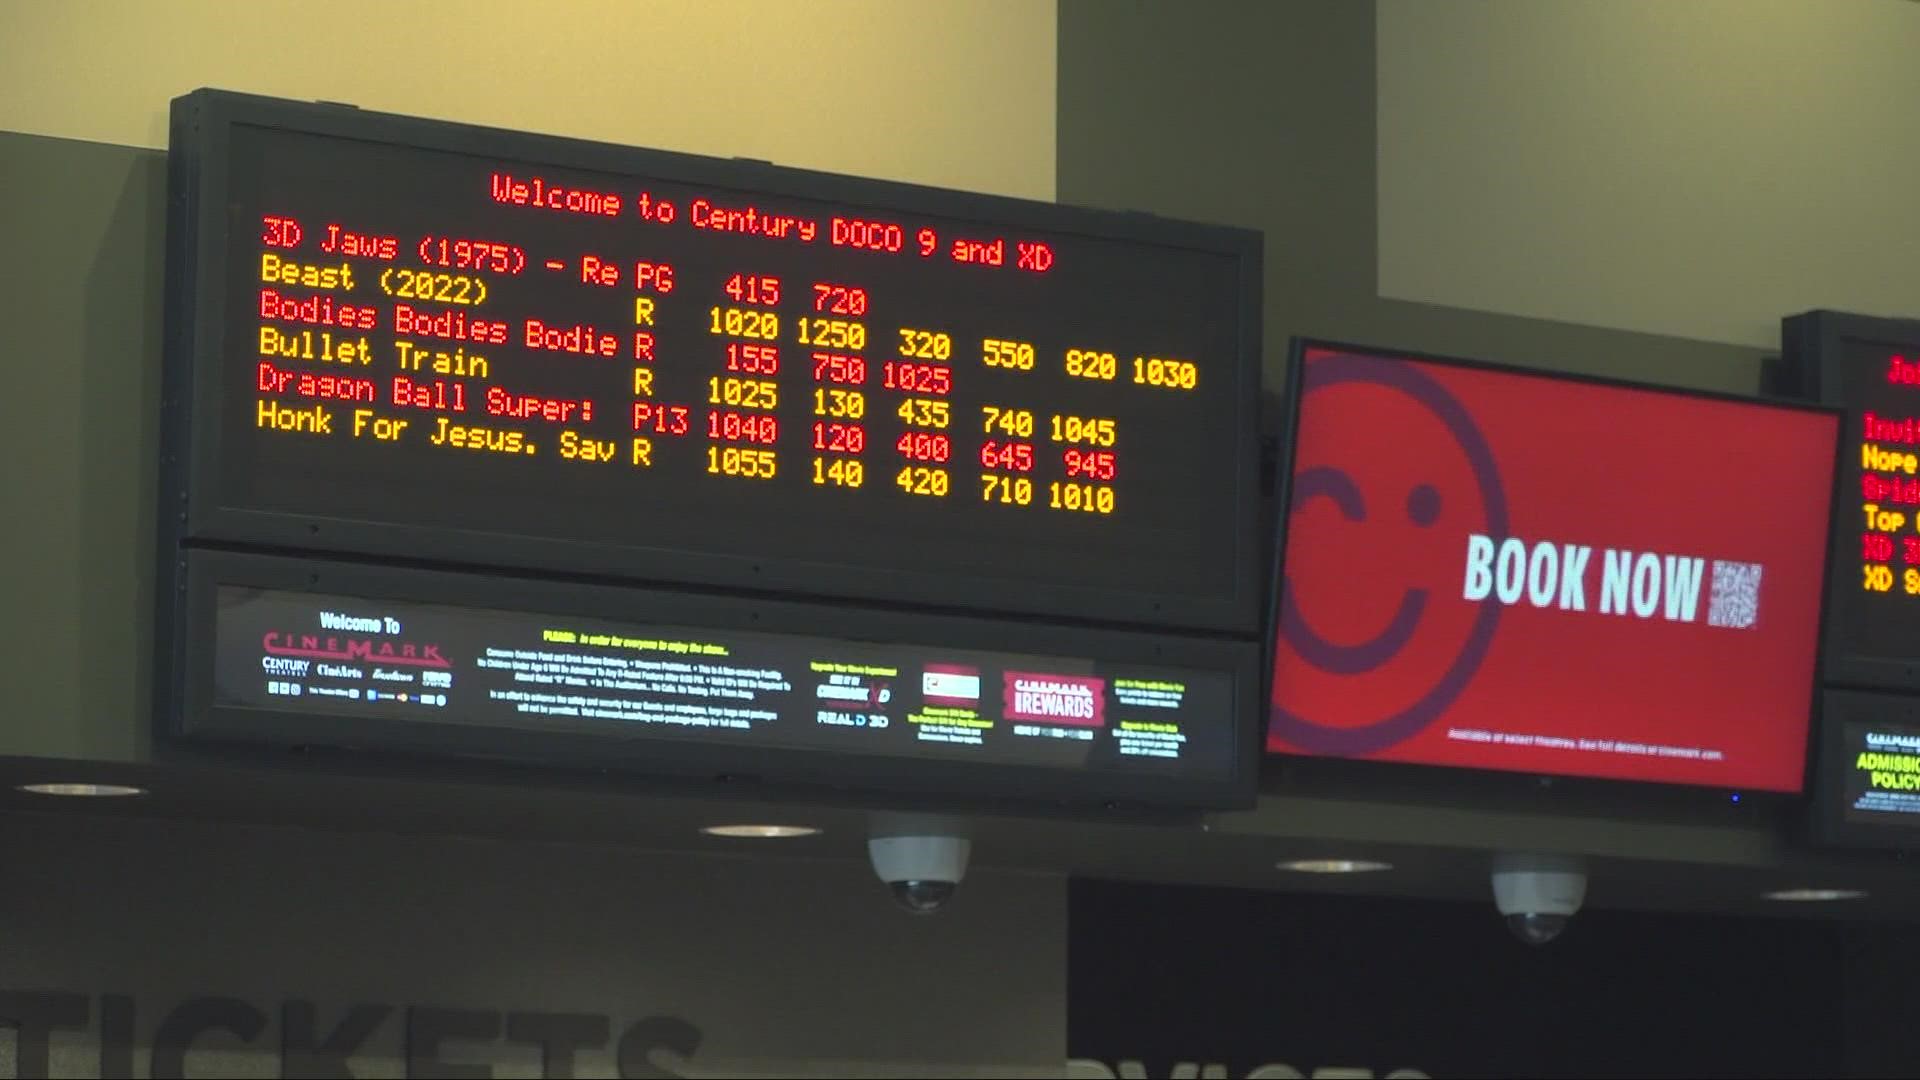 People in the Sacramento area looking to beat the heat could participate in the first National Cinema Day, where certain chains offered $3 movie tickets.